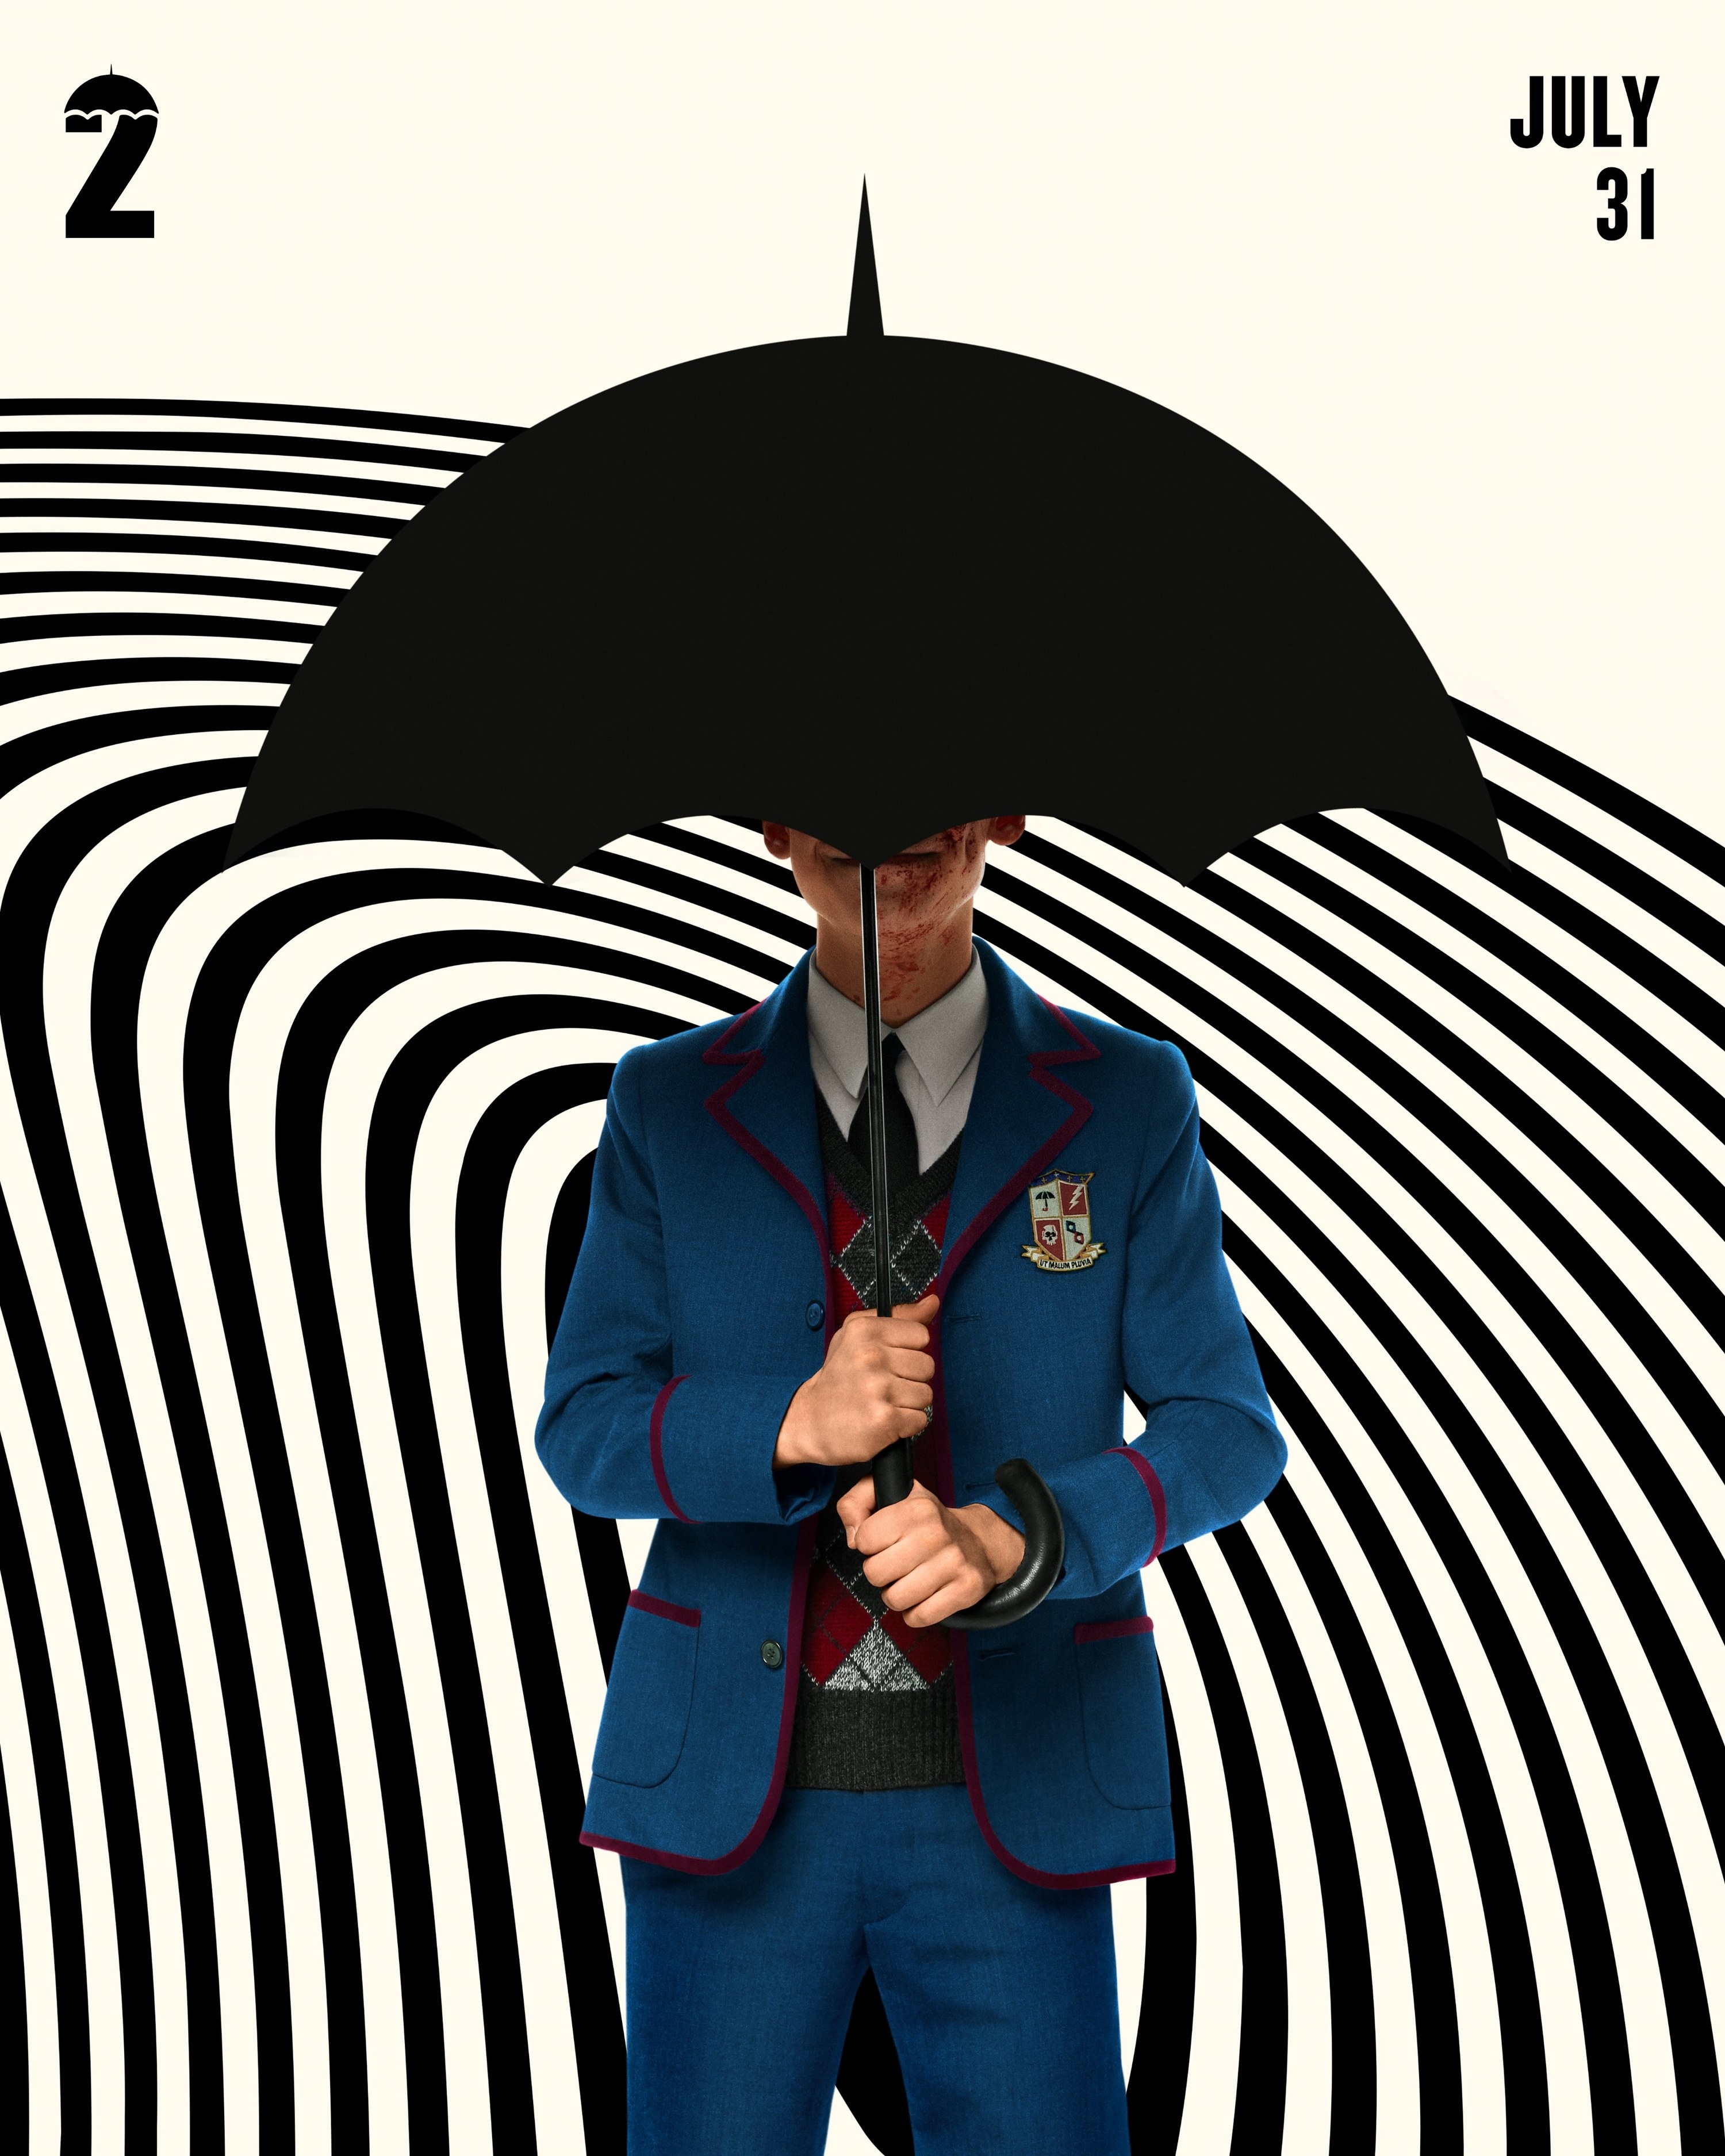 The Season 2 "Umbrella Academy" Character Posters Are Finally Here